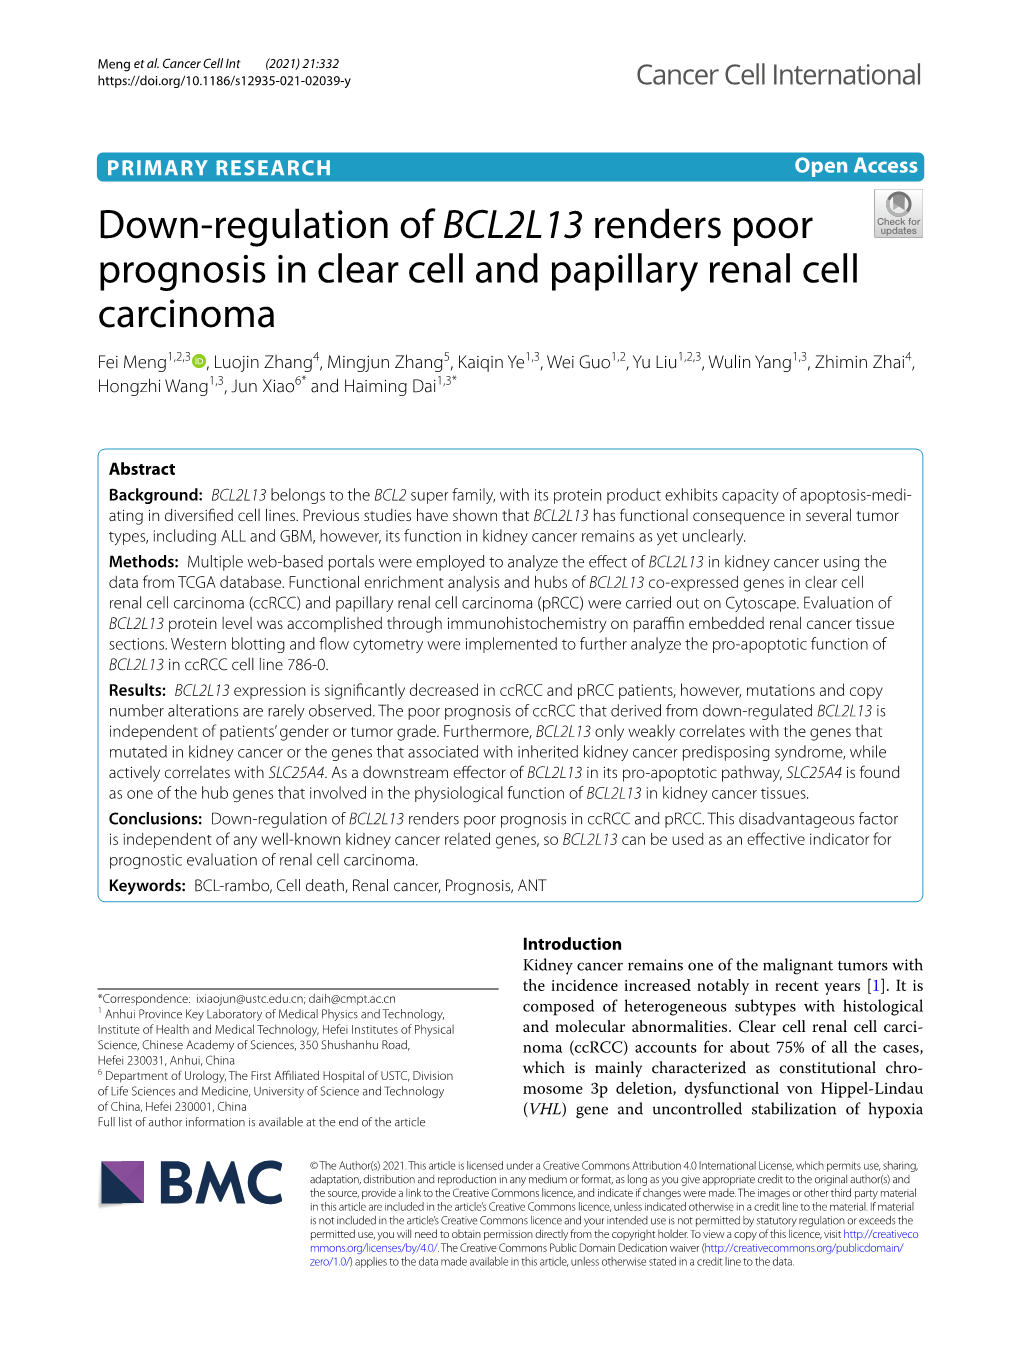 Down-Regulation of BCL2L13 Renders Poor Prognosis in Clear Cell And